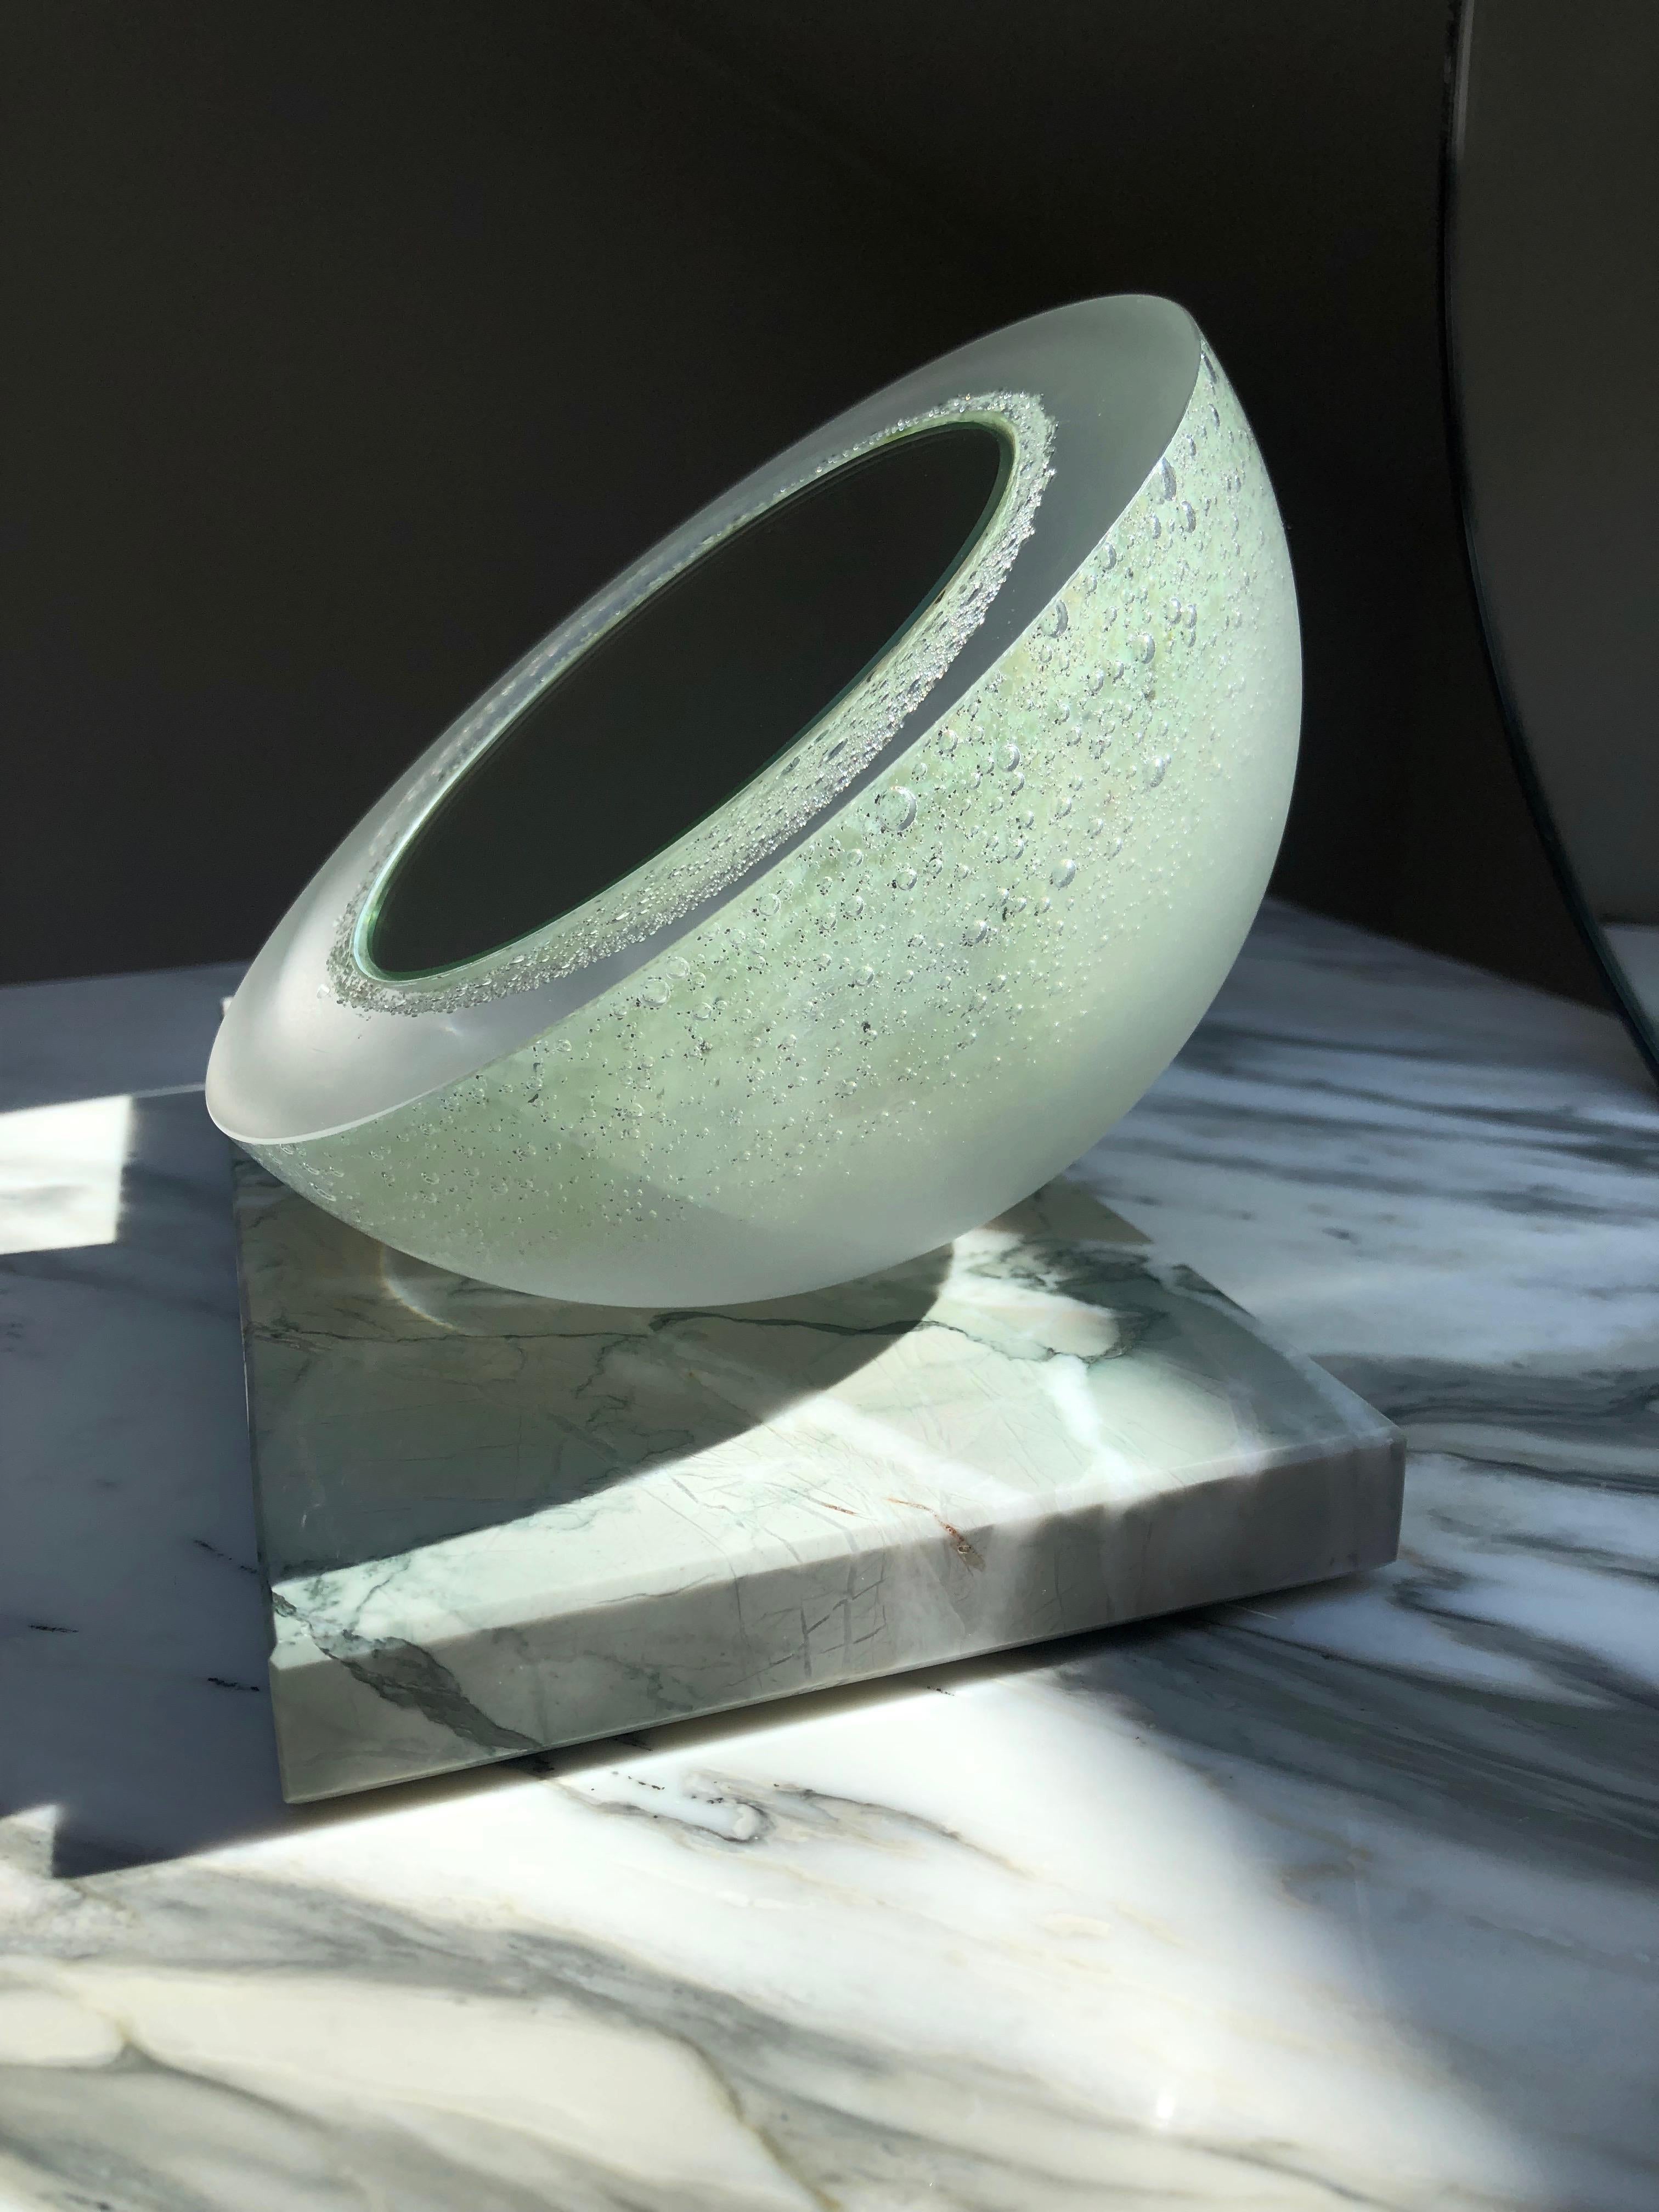 'Ice Queen' vanity / make-up mirror in mint green mouth-blown glass setting on a polished Verde Antigua marble base on soft glides. Thick blown glass shell shows variations from lusterous polished to matt glass at the bottom part, so the mirror can